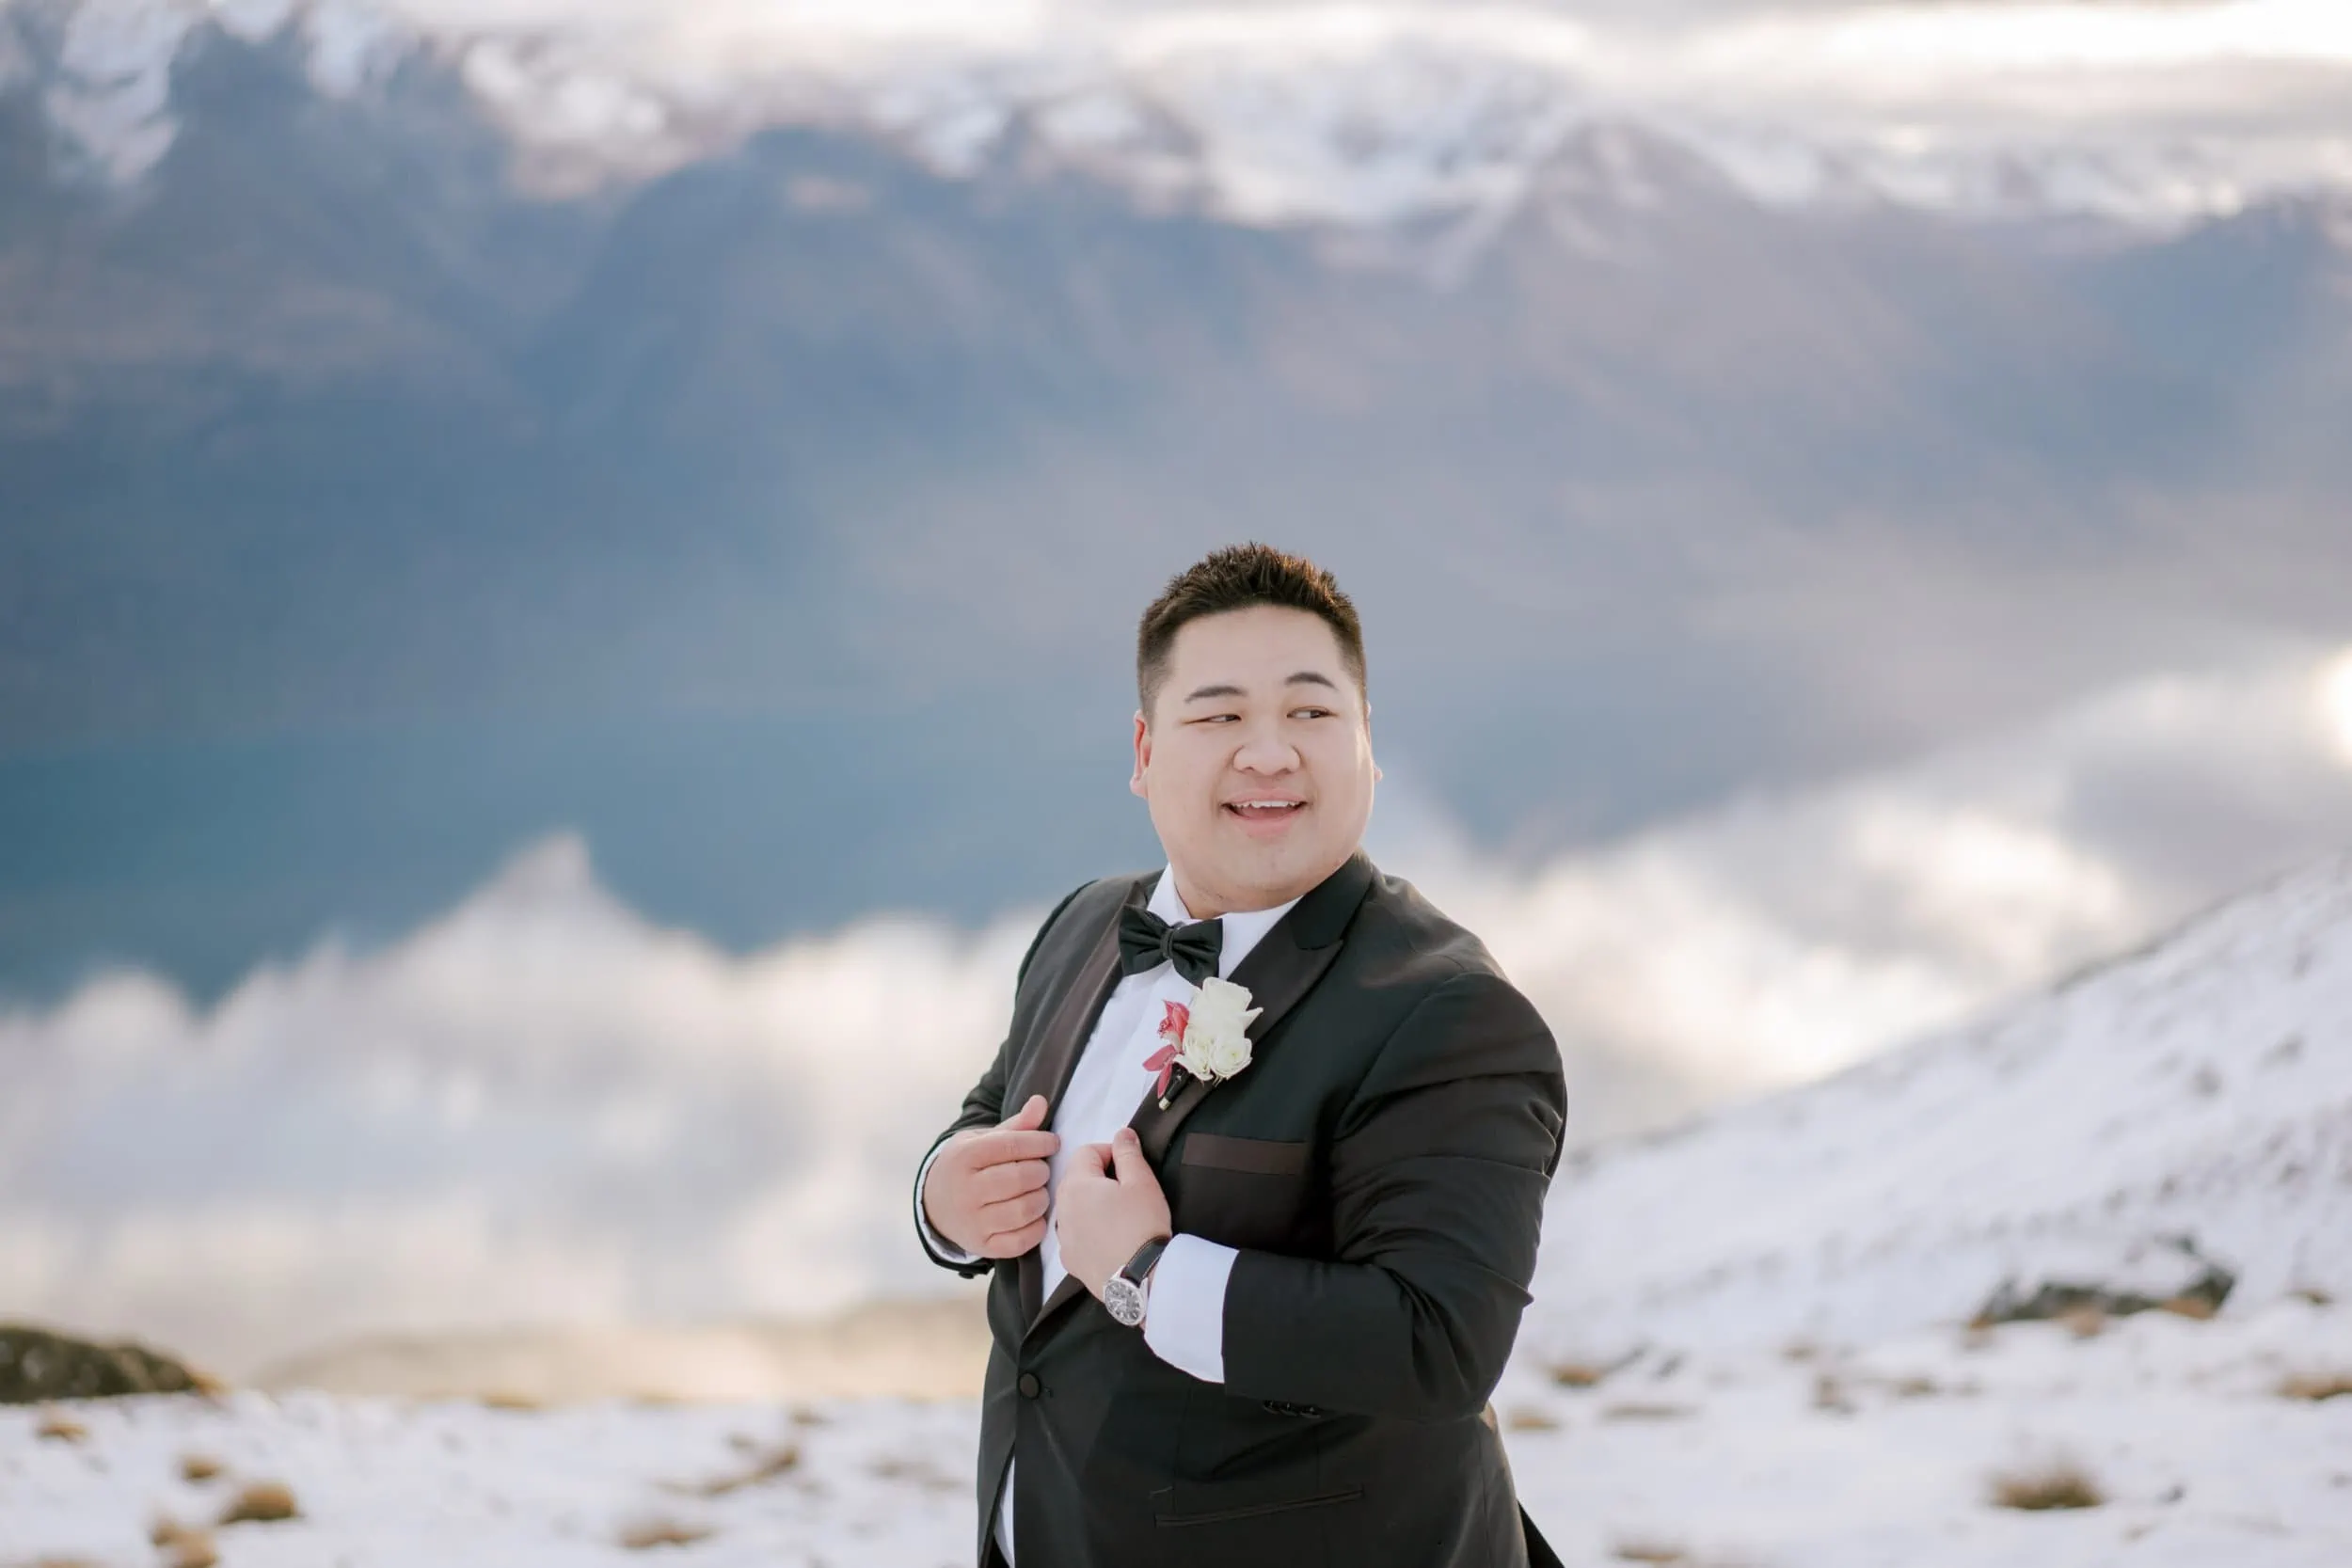 Queenstown New Zealand Elopement Wedding Photographer - A man in a tuxedo enjoying a Lam and Wendy's Kamana Lakehouse Wedding on top of a snowy mountain.